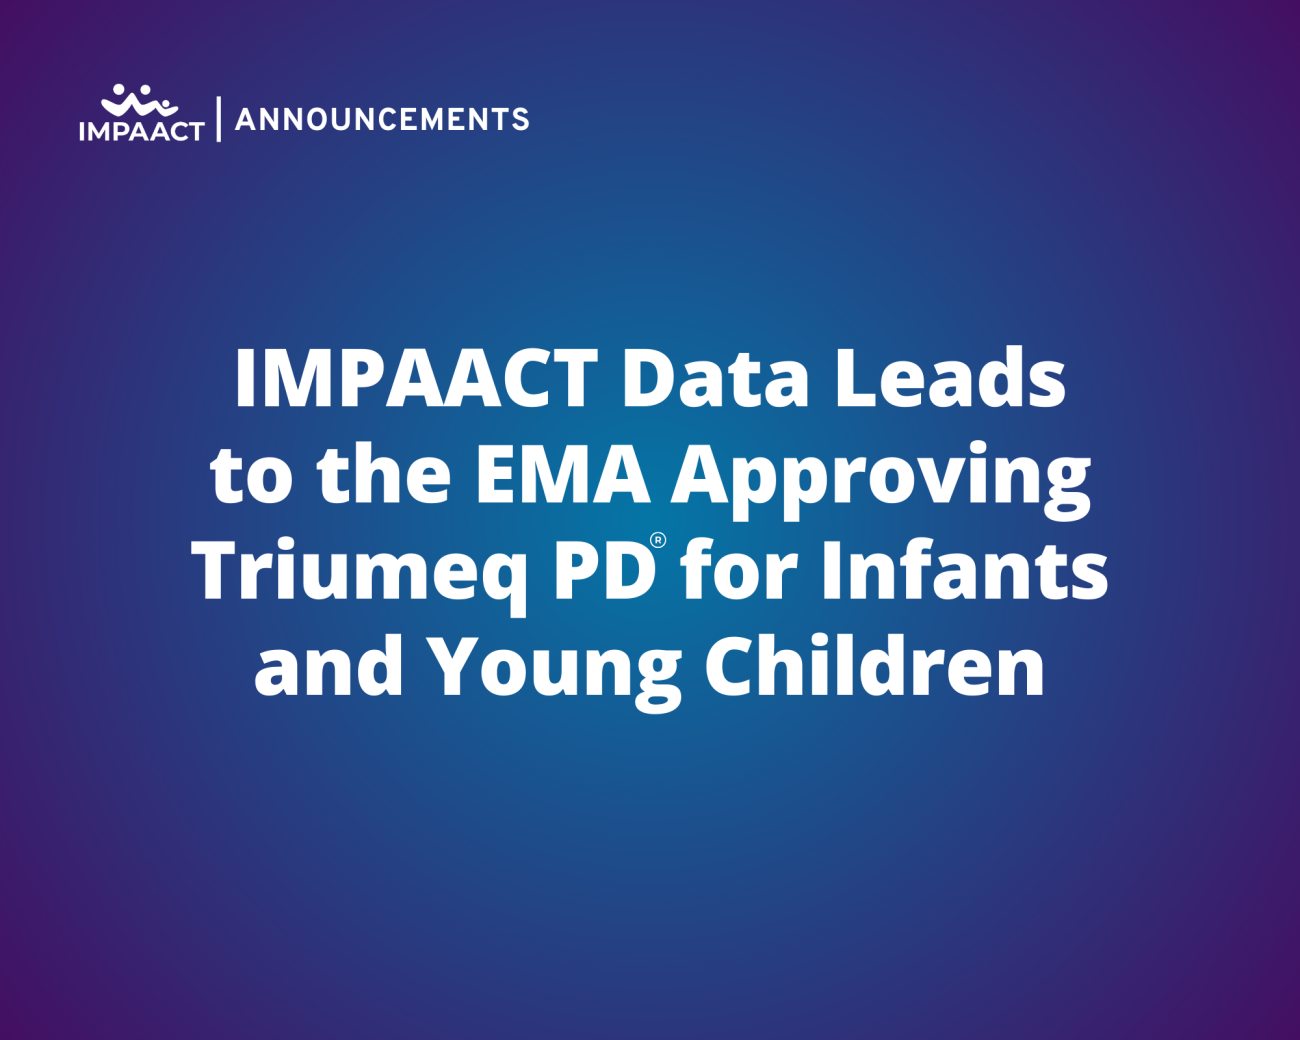 IMPAACT Data Leads to the EMA Approving Triumeq PD for Infants and Young Children